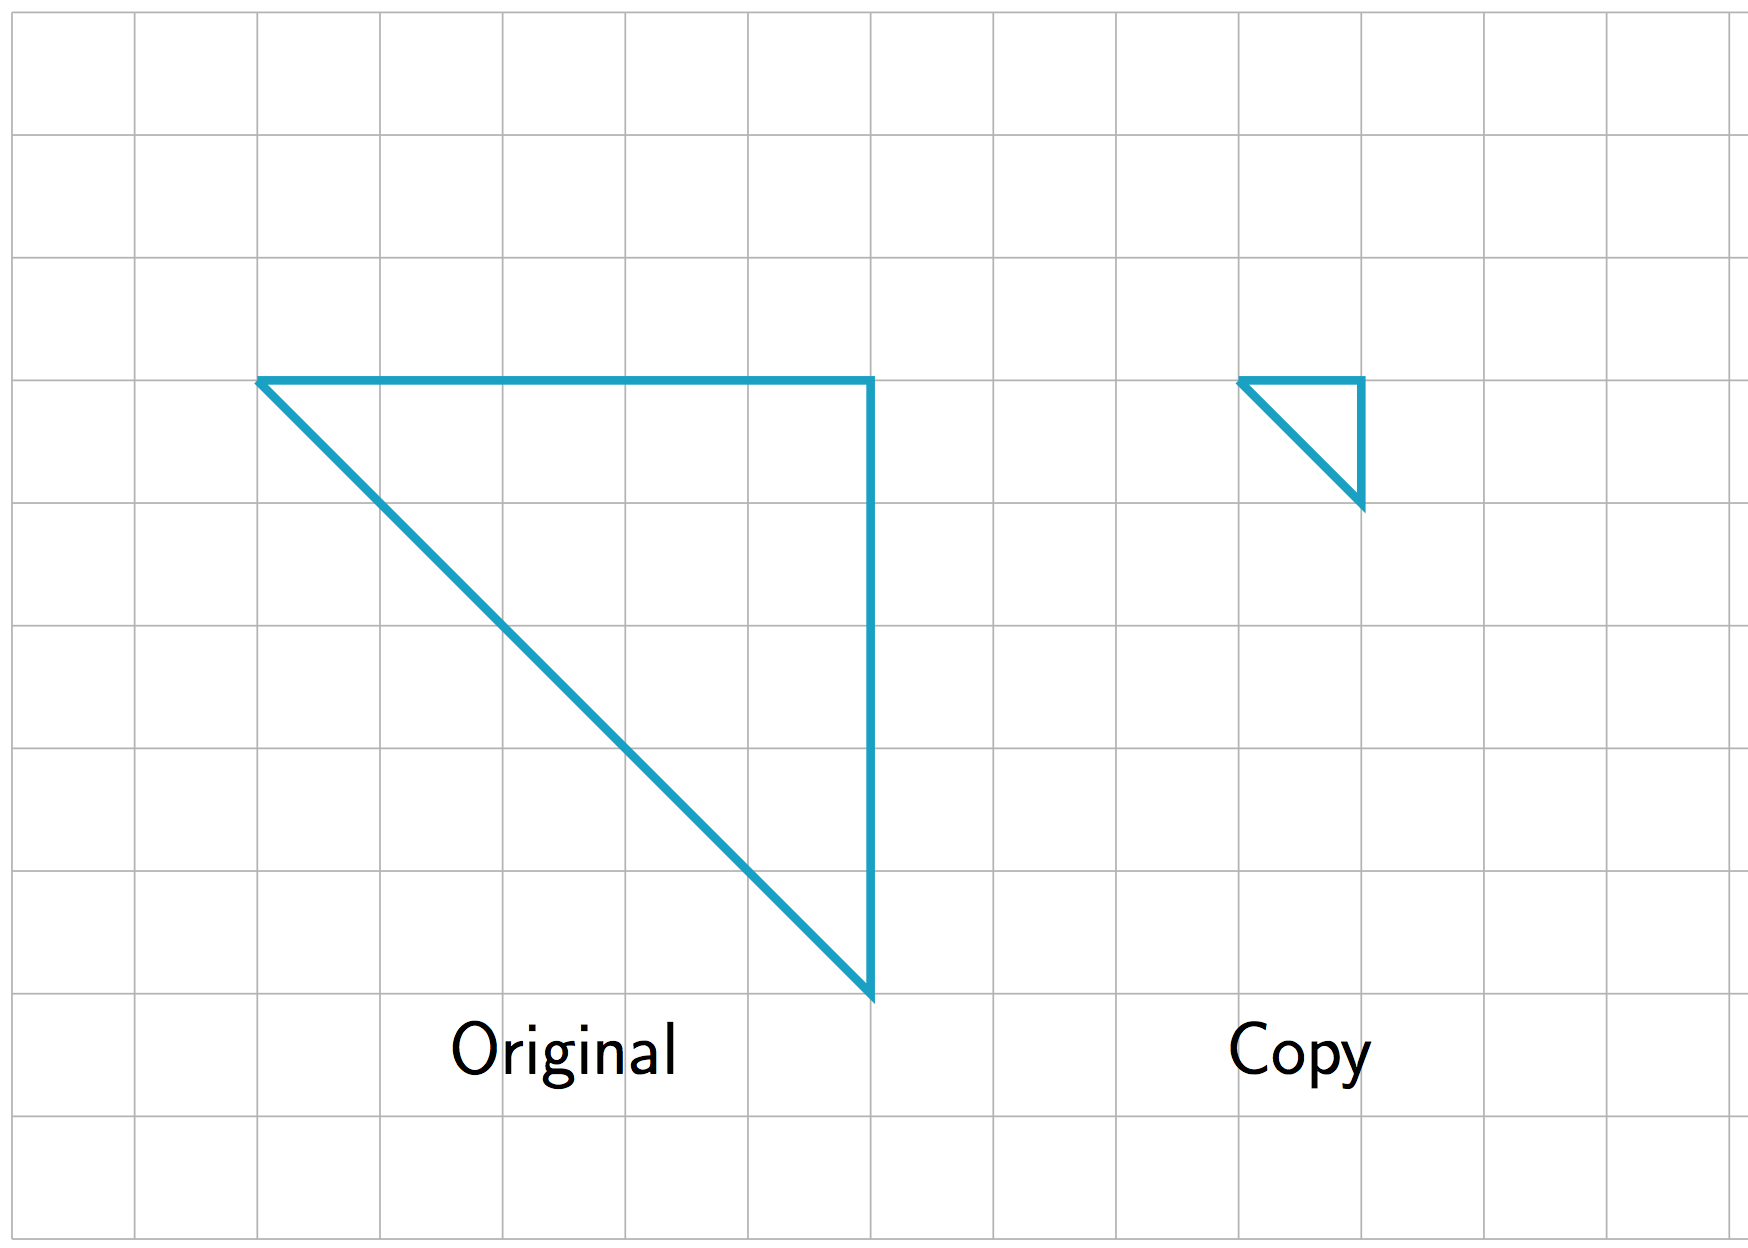 On a grid. Original triangle has sides of length 5, 5, and a diagonal length of down 5, over 5. The copy has side lengths of 1, 1, and a diagonal length of down 1, over 1.